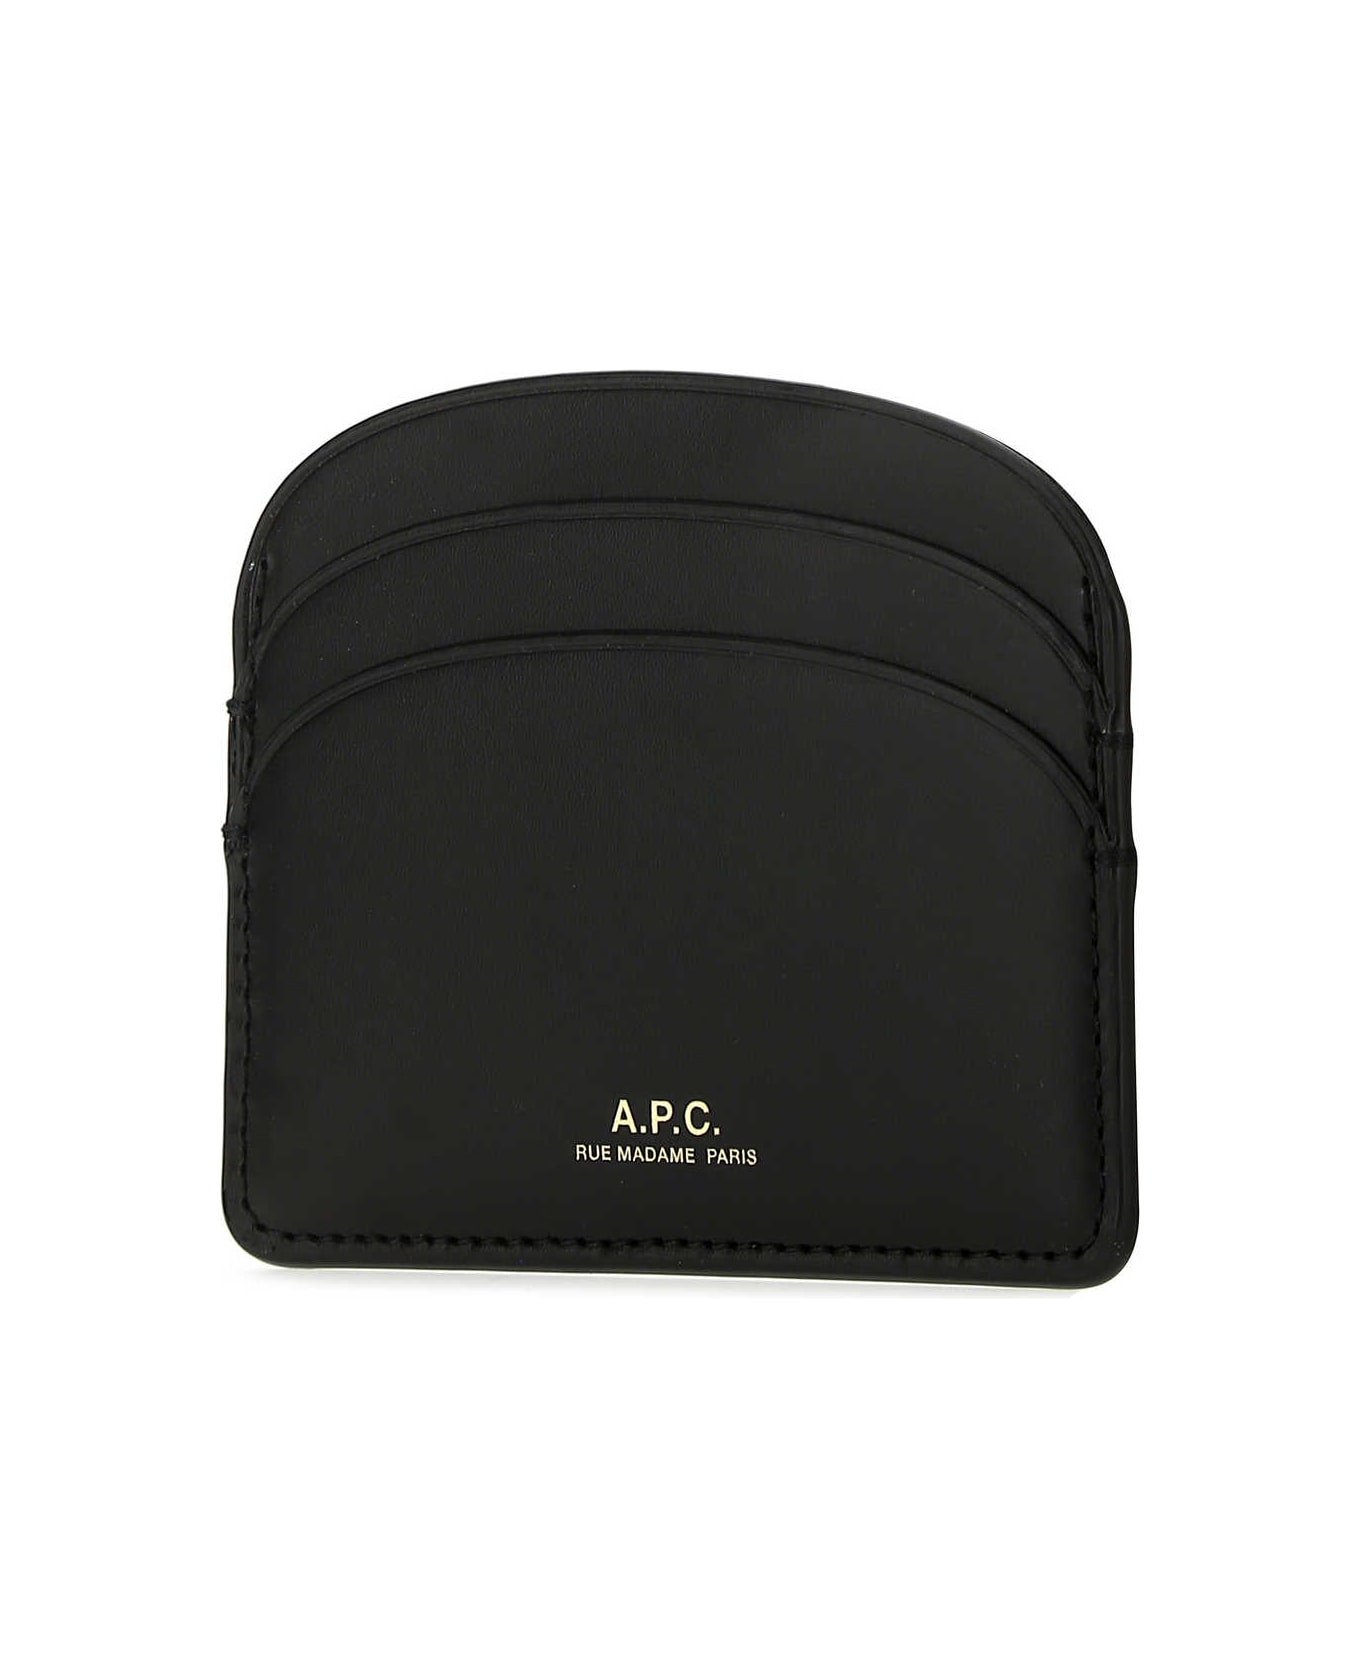 A.P.C. Black Leather Card Holder - LZZ